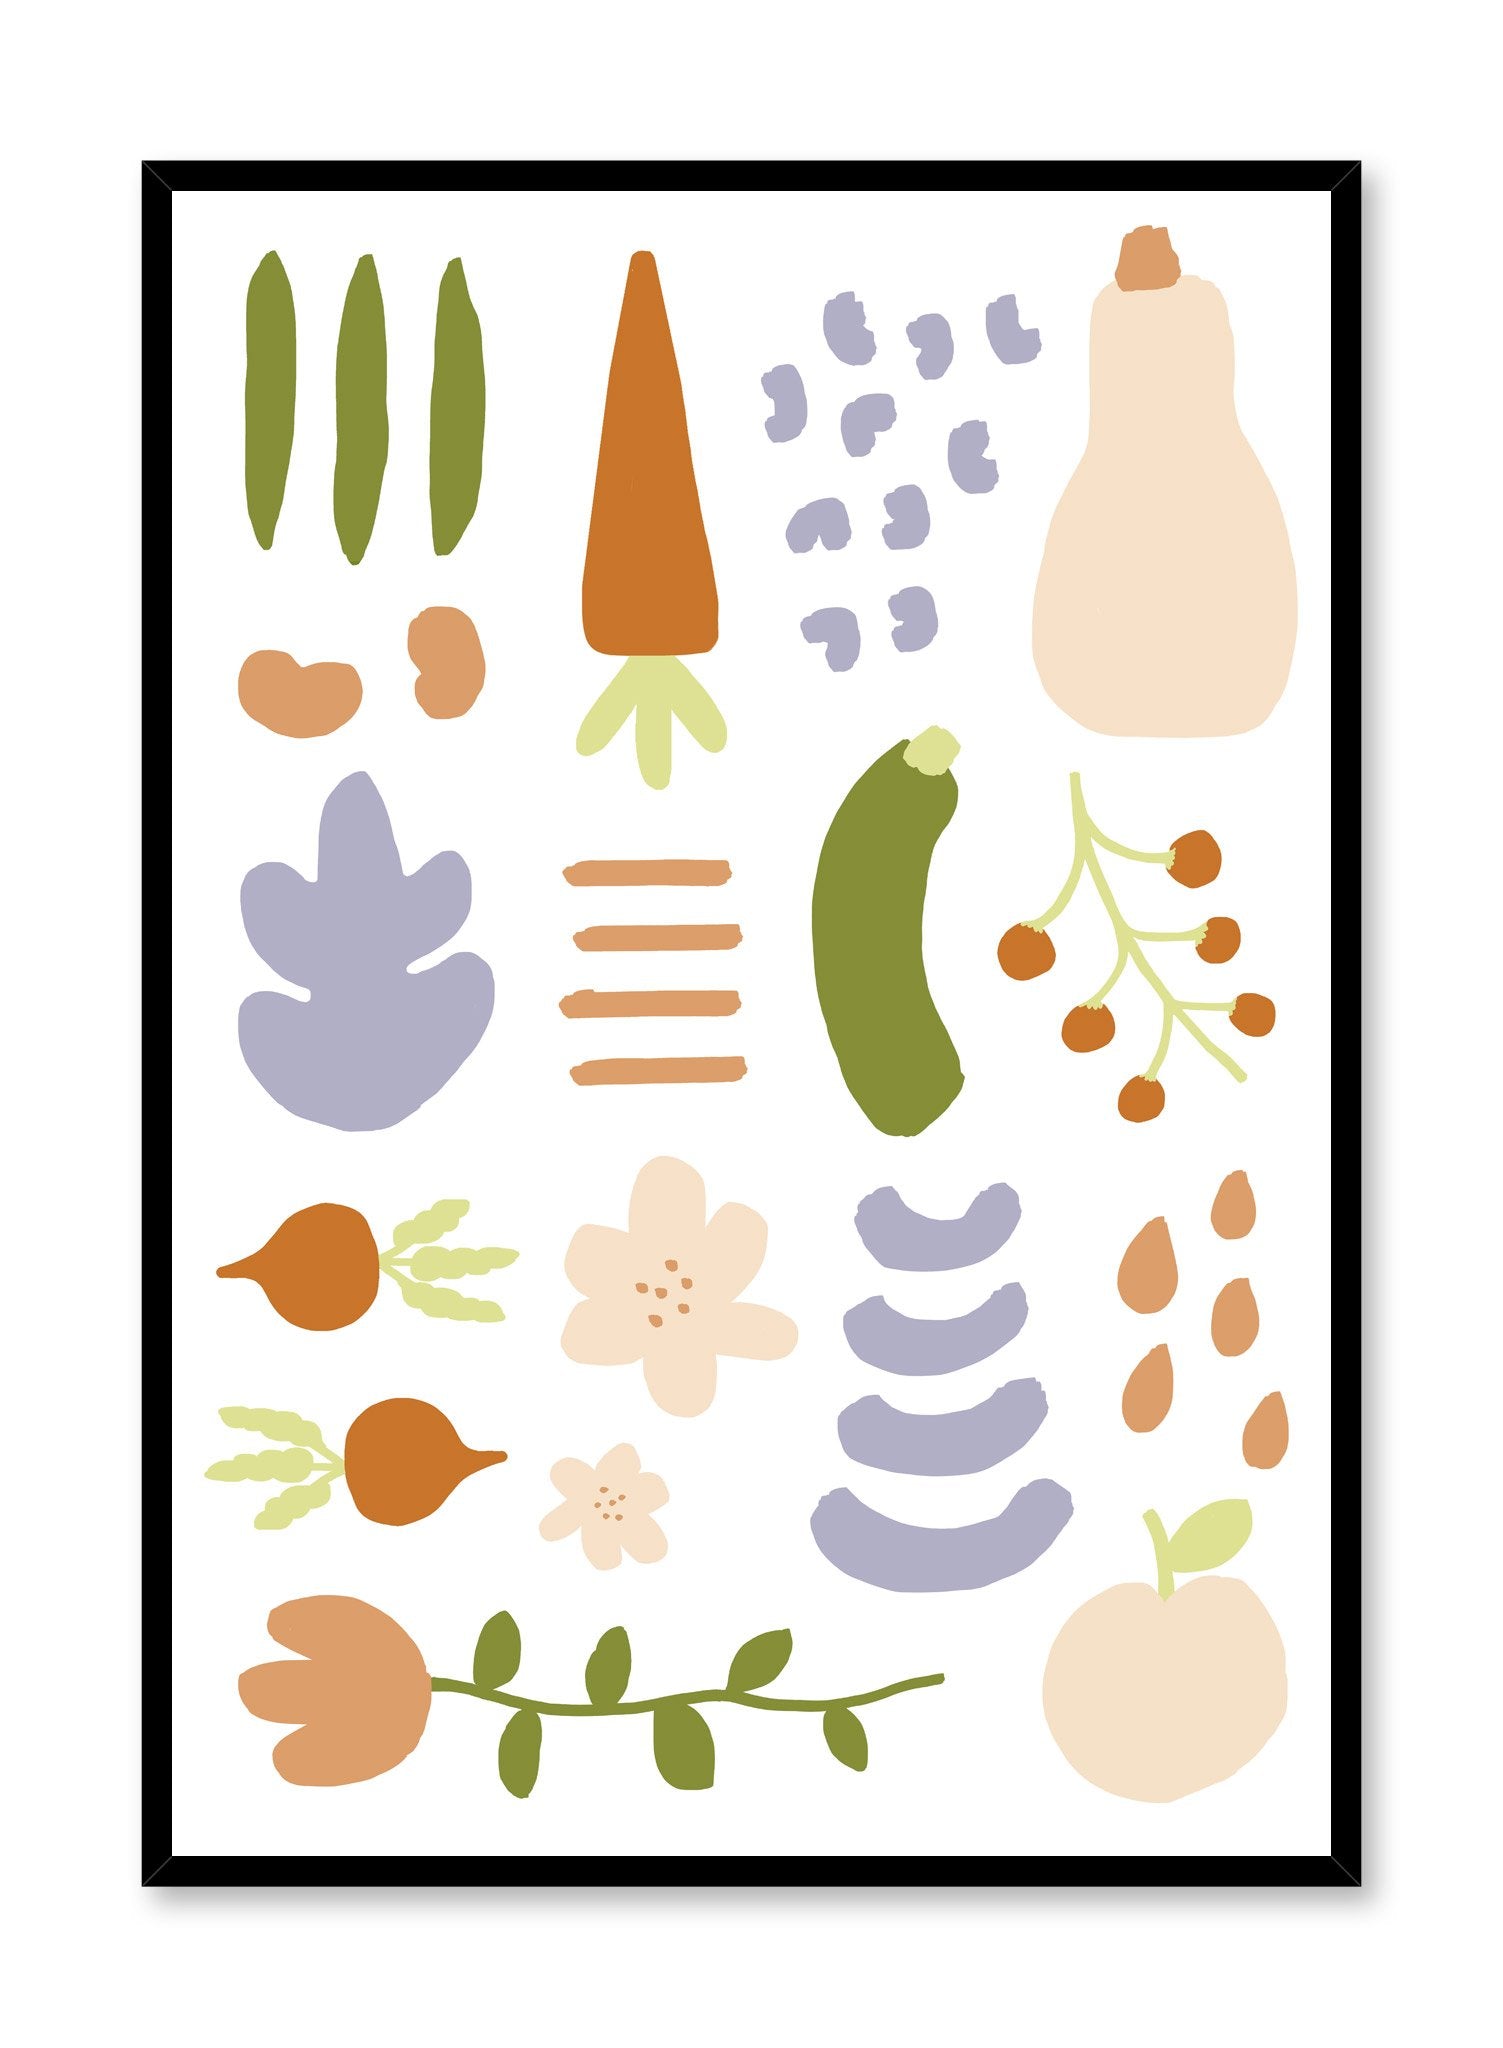 Deconstructed Garden is a fruit and veggie illustration poster by Opposite Wall.